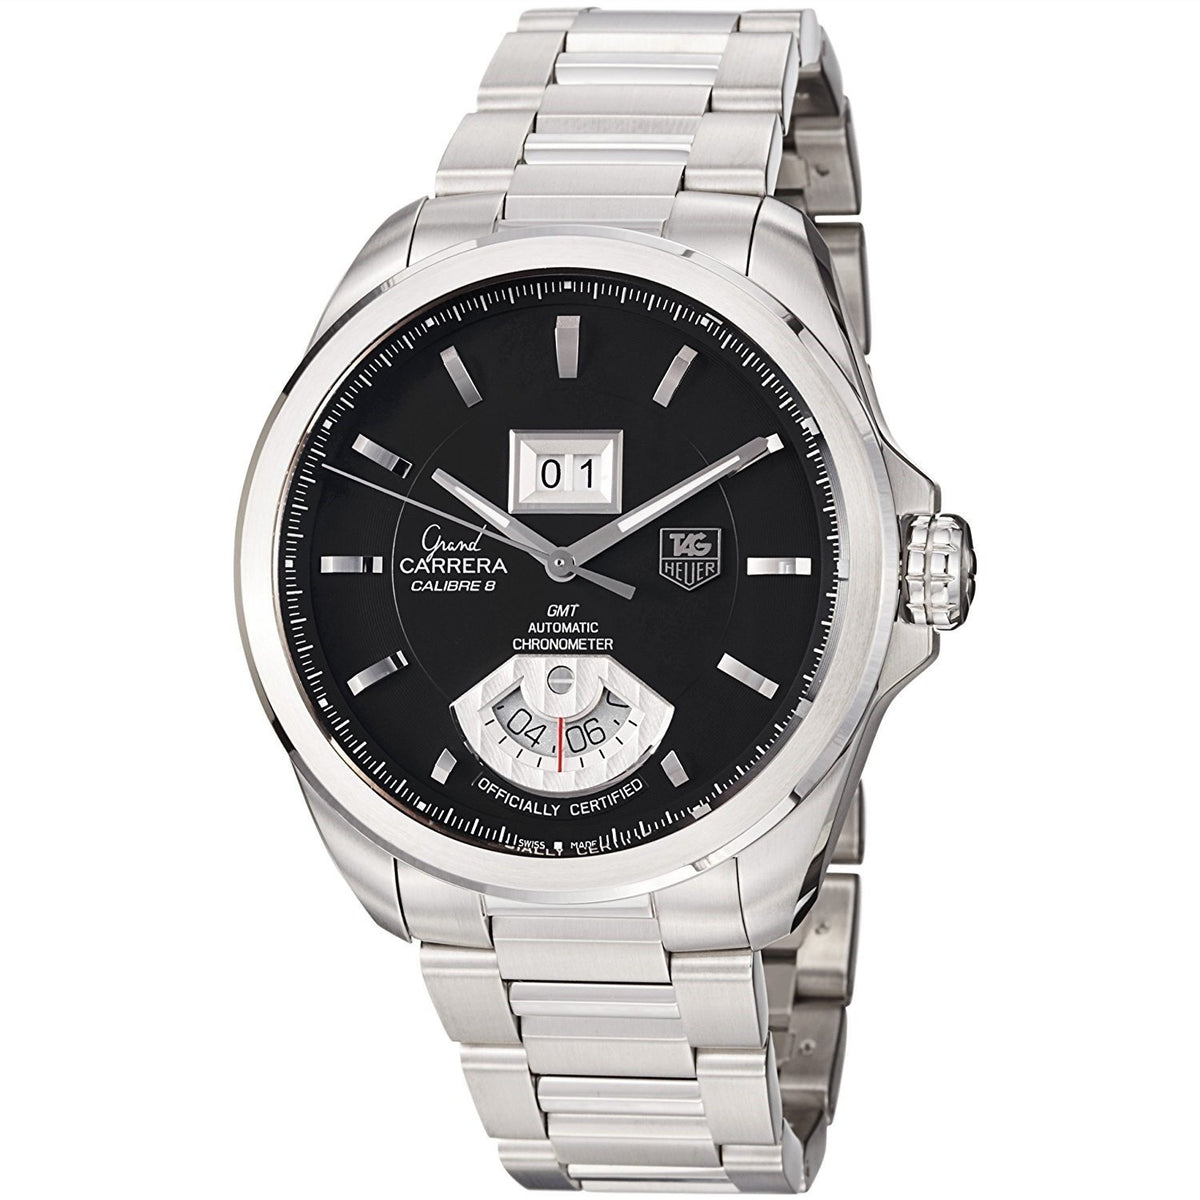 Tag Heuer Men&#39;s WAV5111.BA0901 Grand Carrera GMT ChronoMeter Automatic Stainless Steel Watch